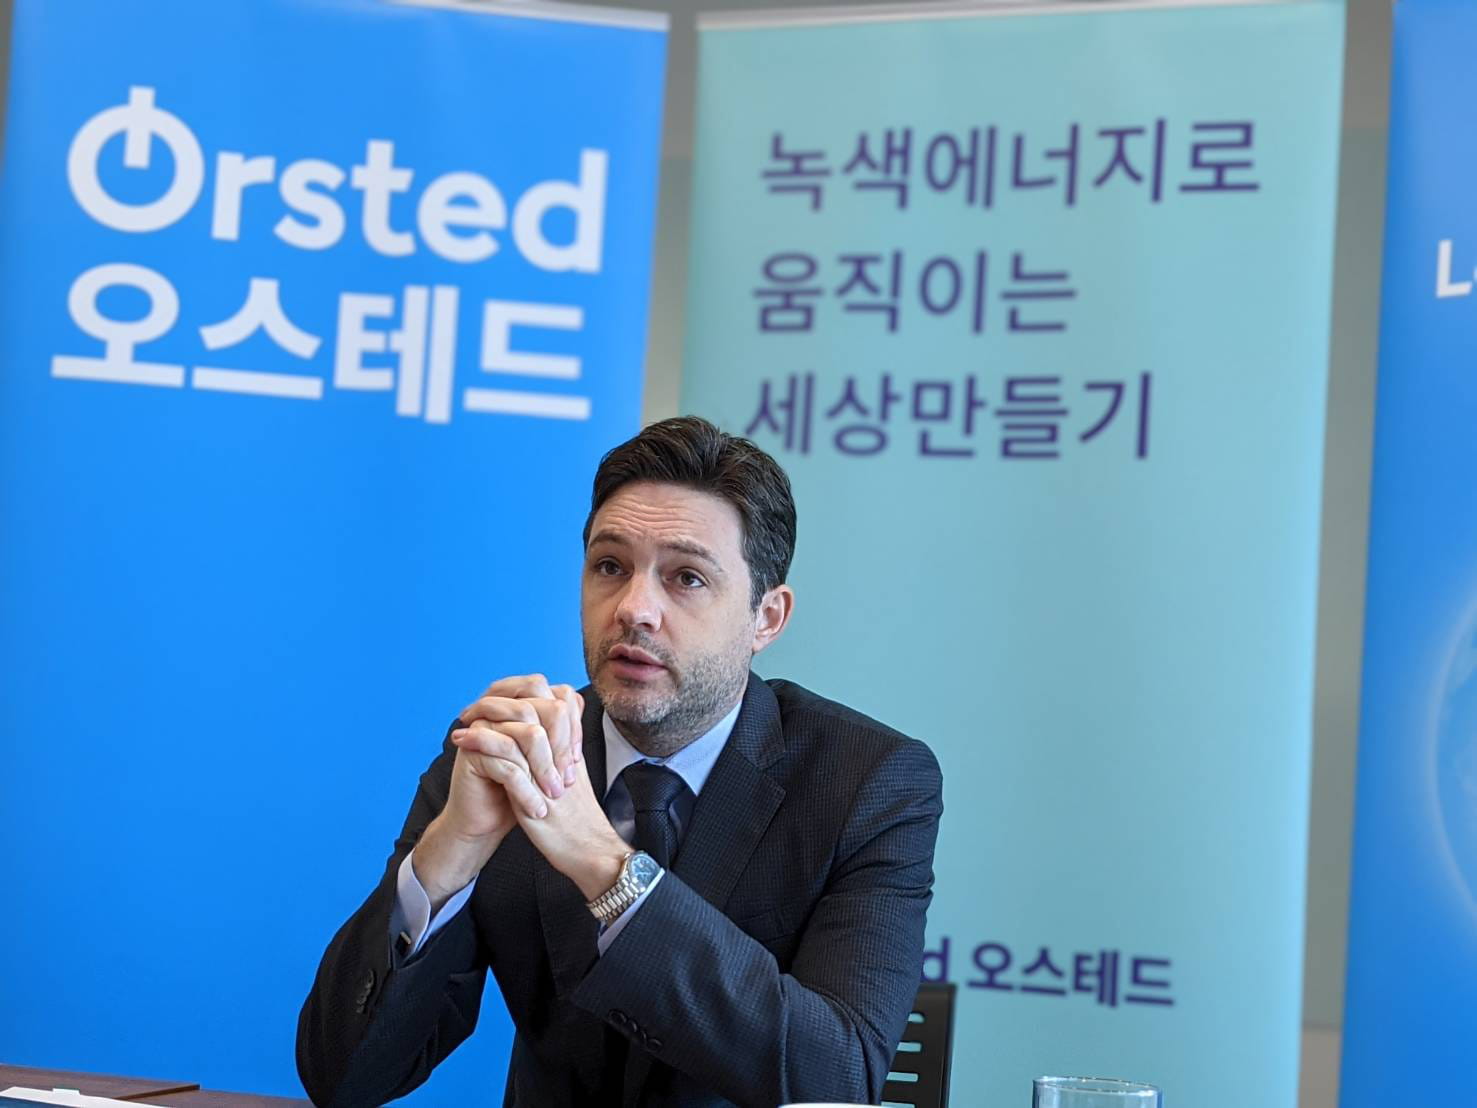 Matthias Bausenwein, President of Ørsted Asia-Pacific, outlines Ørsted’s strategic plans to provide clean energy to Korea